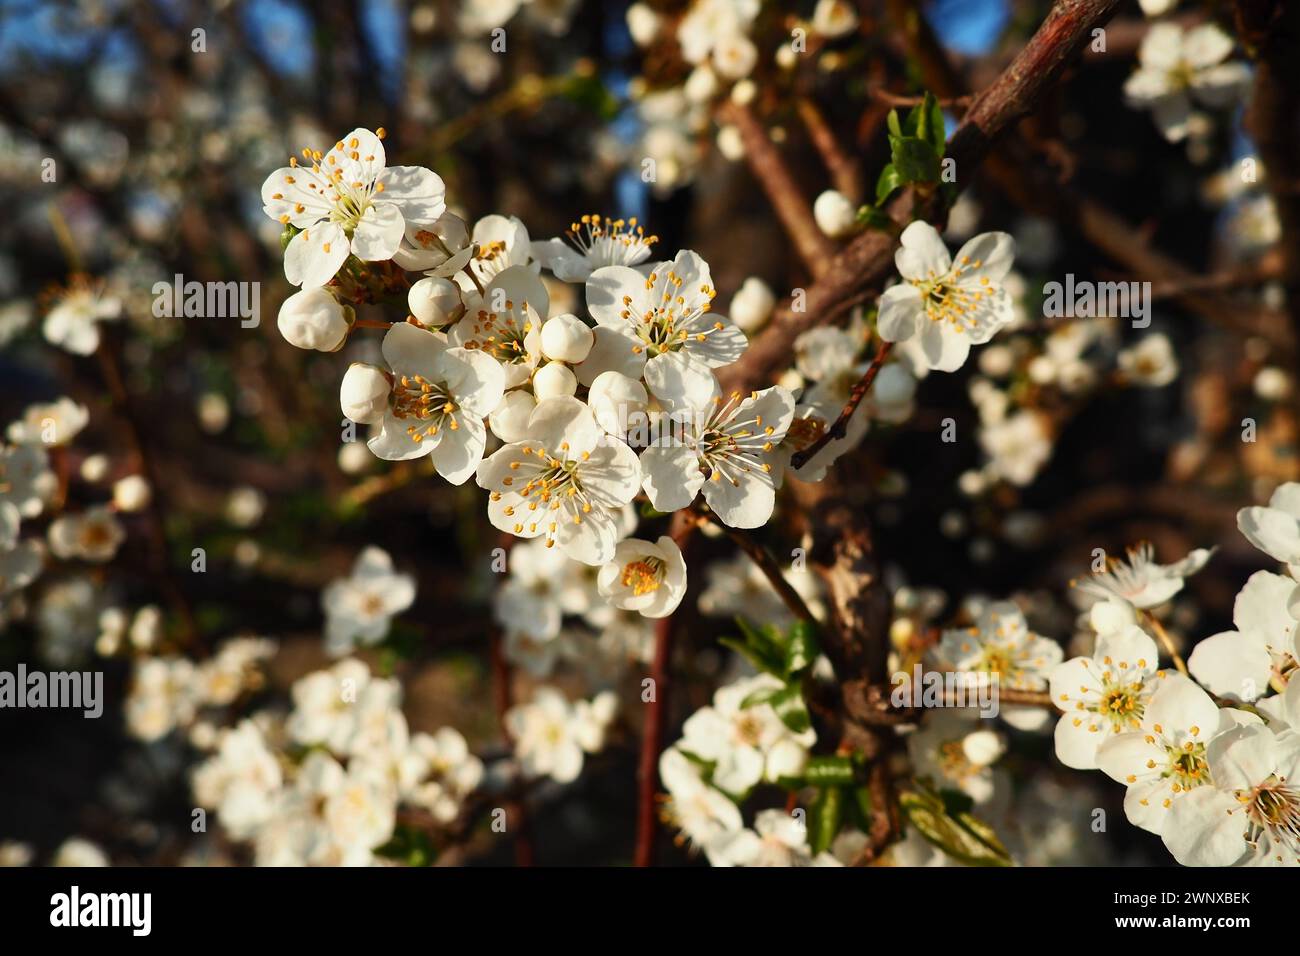 Blossoming of cherries, sweet cherries and bird cherry. Beautiful fragrant white flowers on the branches during the golden hour. Spring white flowers Stock Photo